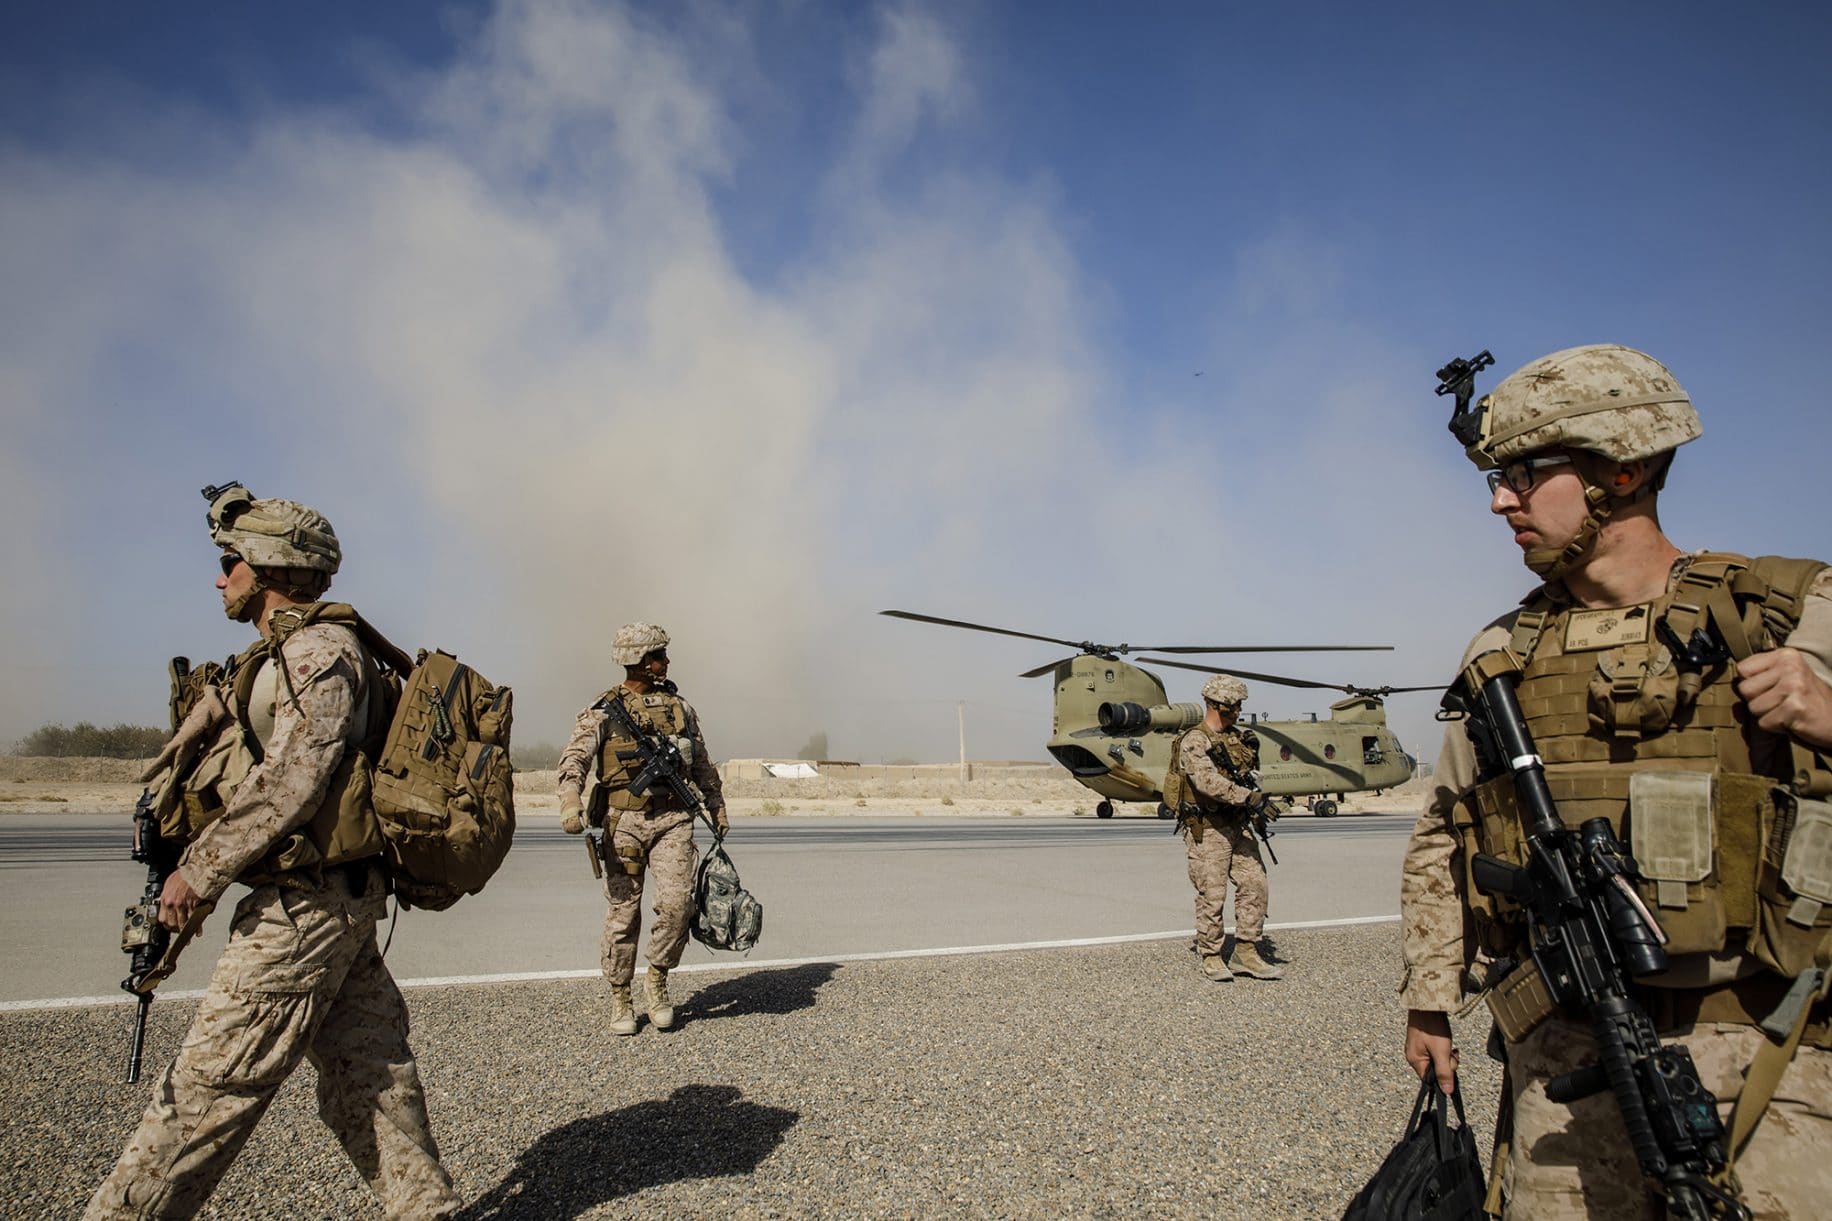 Taliban may attack US troops as they leave Afghanistan, Pentagon says ...